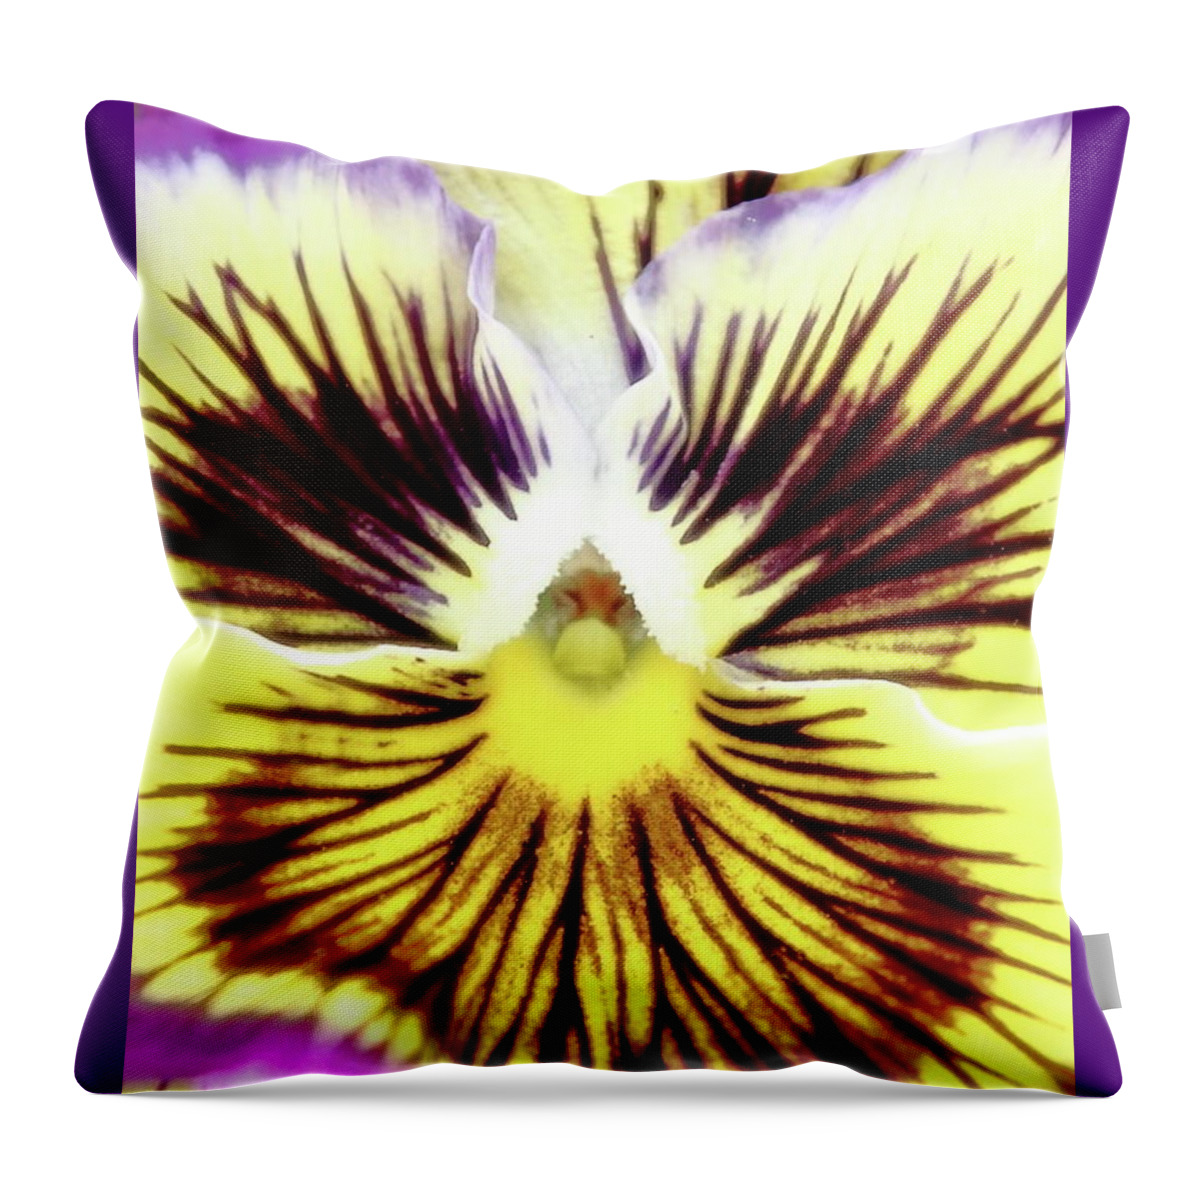 Floral Throw Pillow featuring the photograph You Pansy by Lens Art Photography By Larry Trager